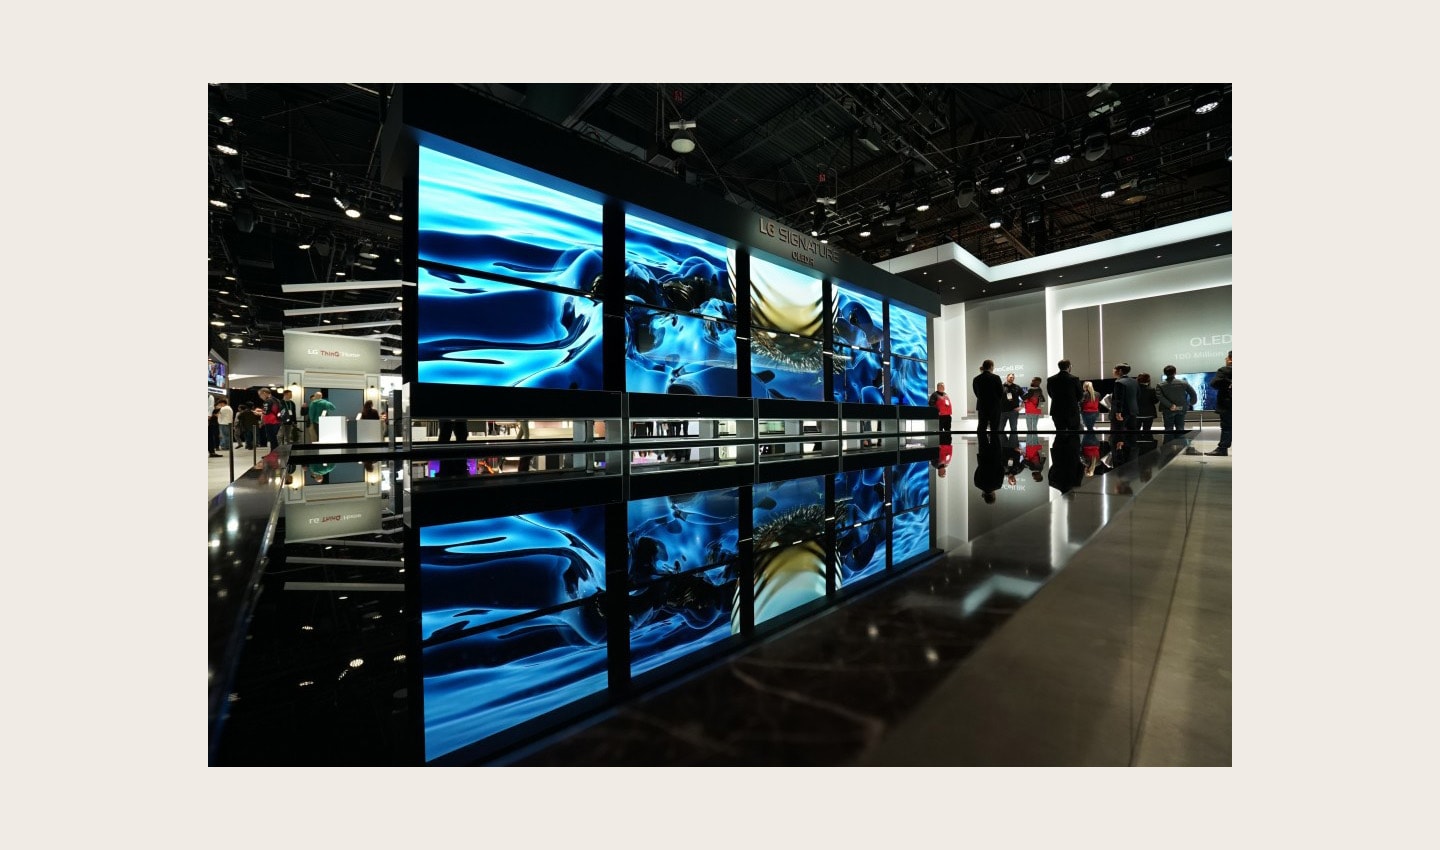 Ten LG SIGNATURE OLED R TVs, five hanging upside down, create an awe-inspiring display at the company’s CES 2020 booth